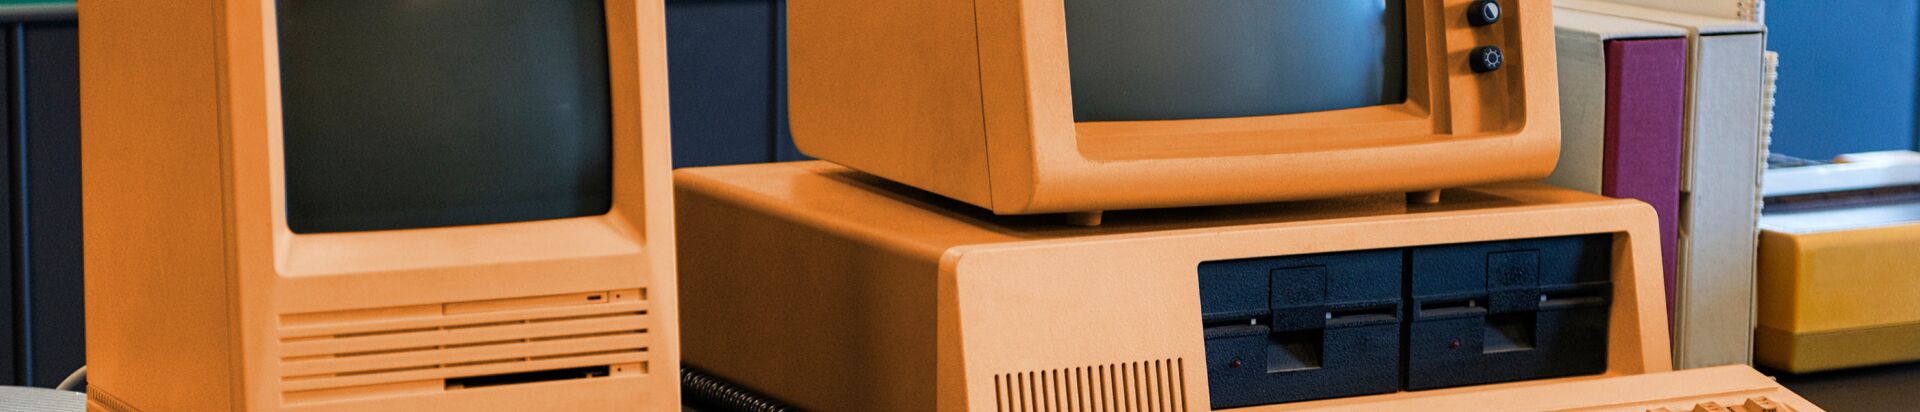 some very old computers as background image for transforming legacy systems